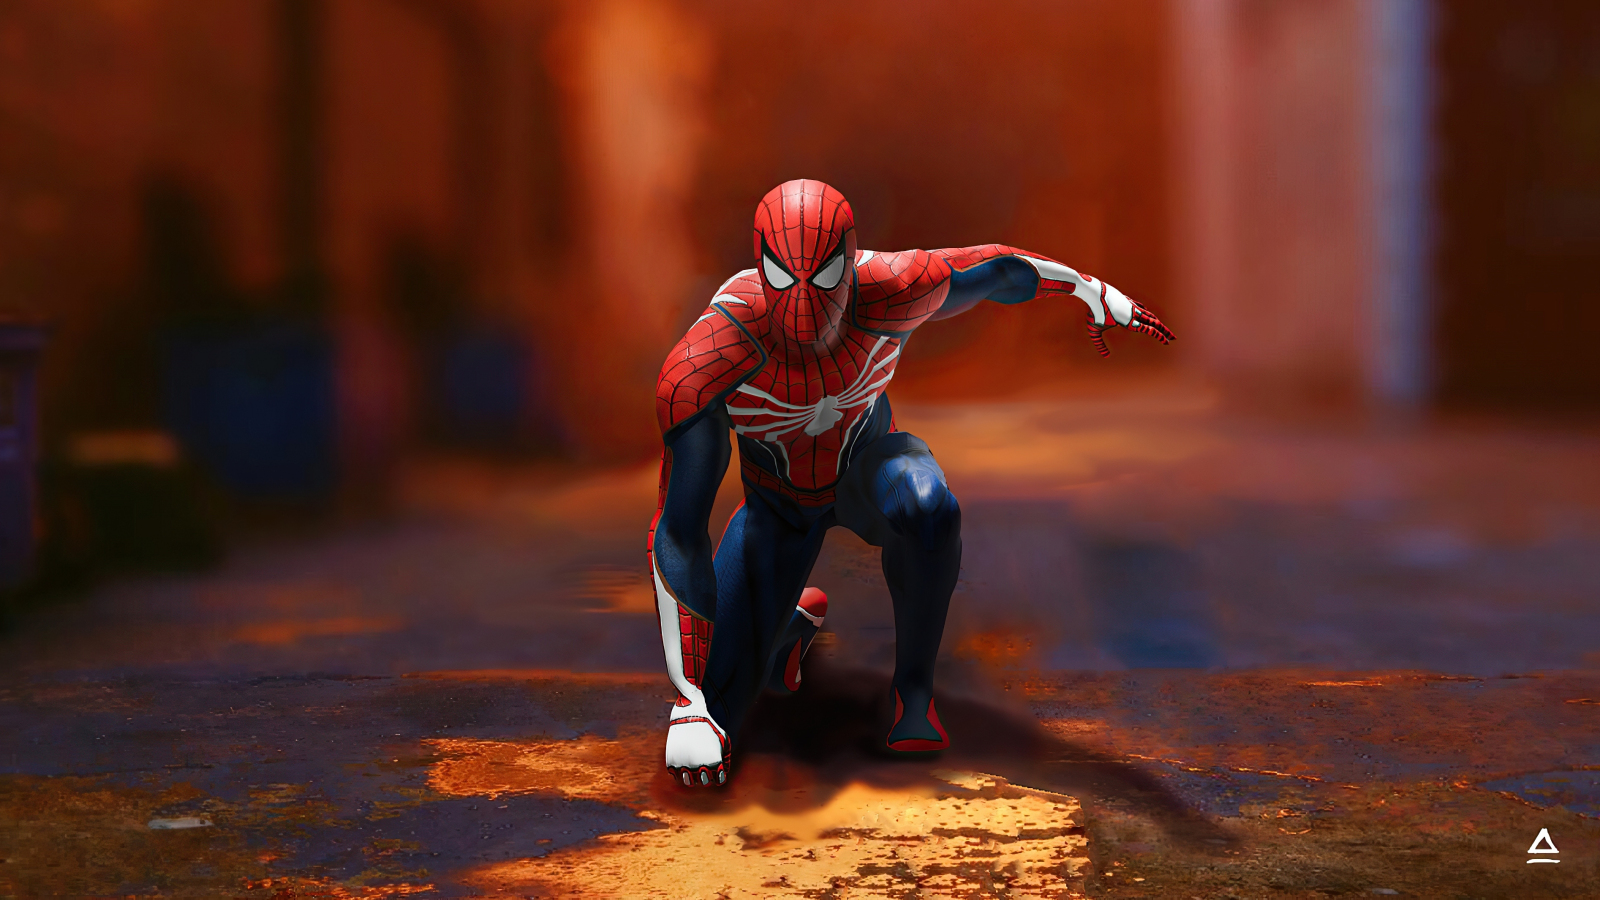 Download wallpaper 1600x900 spider-man, ready for jump, game art, 16:9 widescreen  1600x900 hd background, 25808